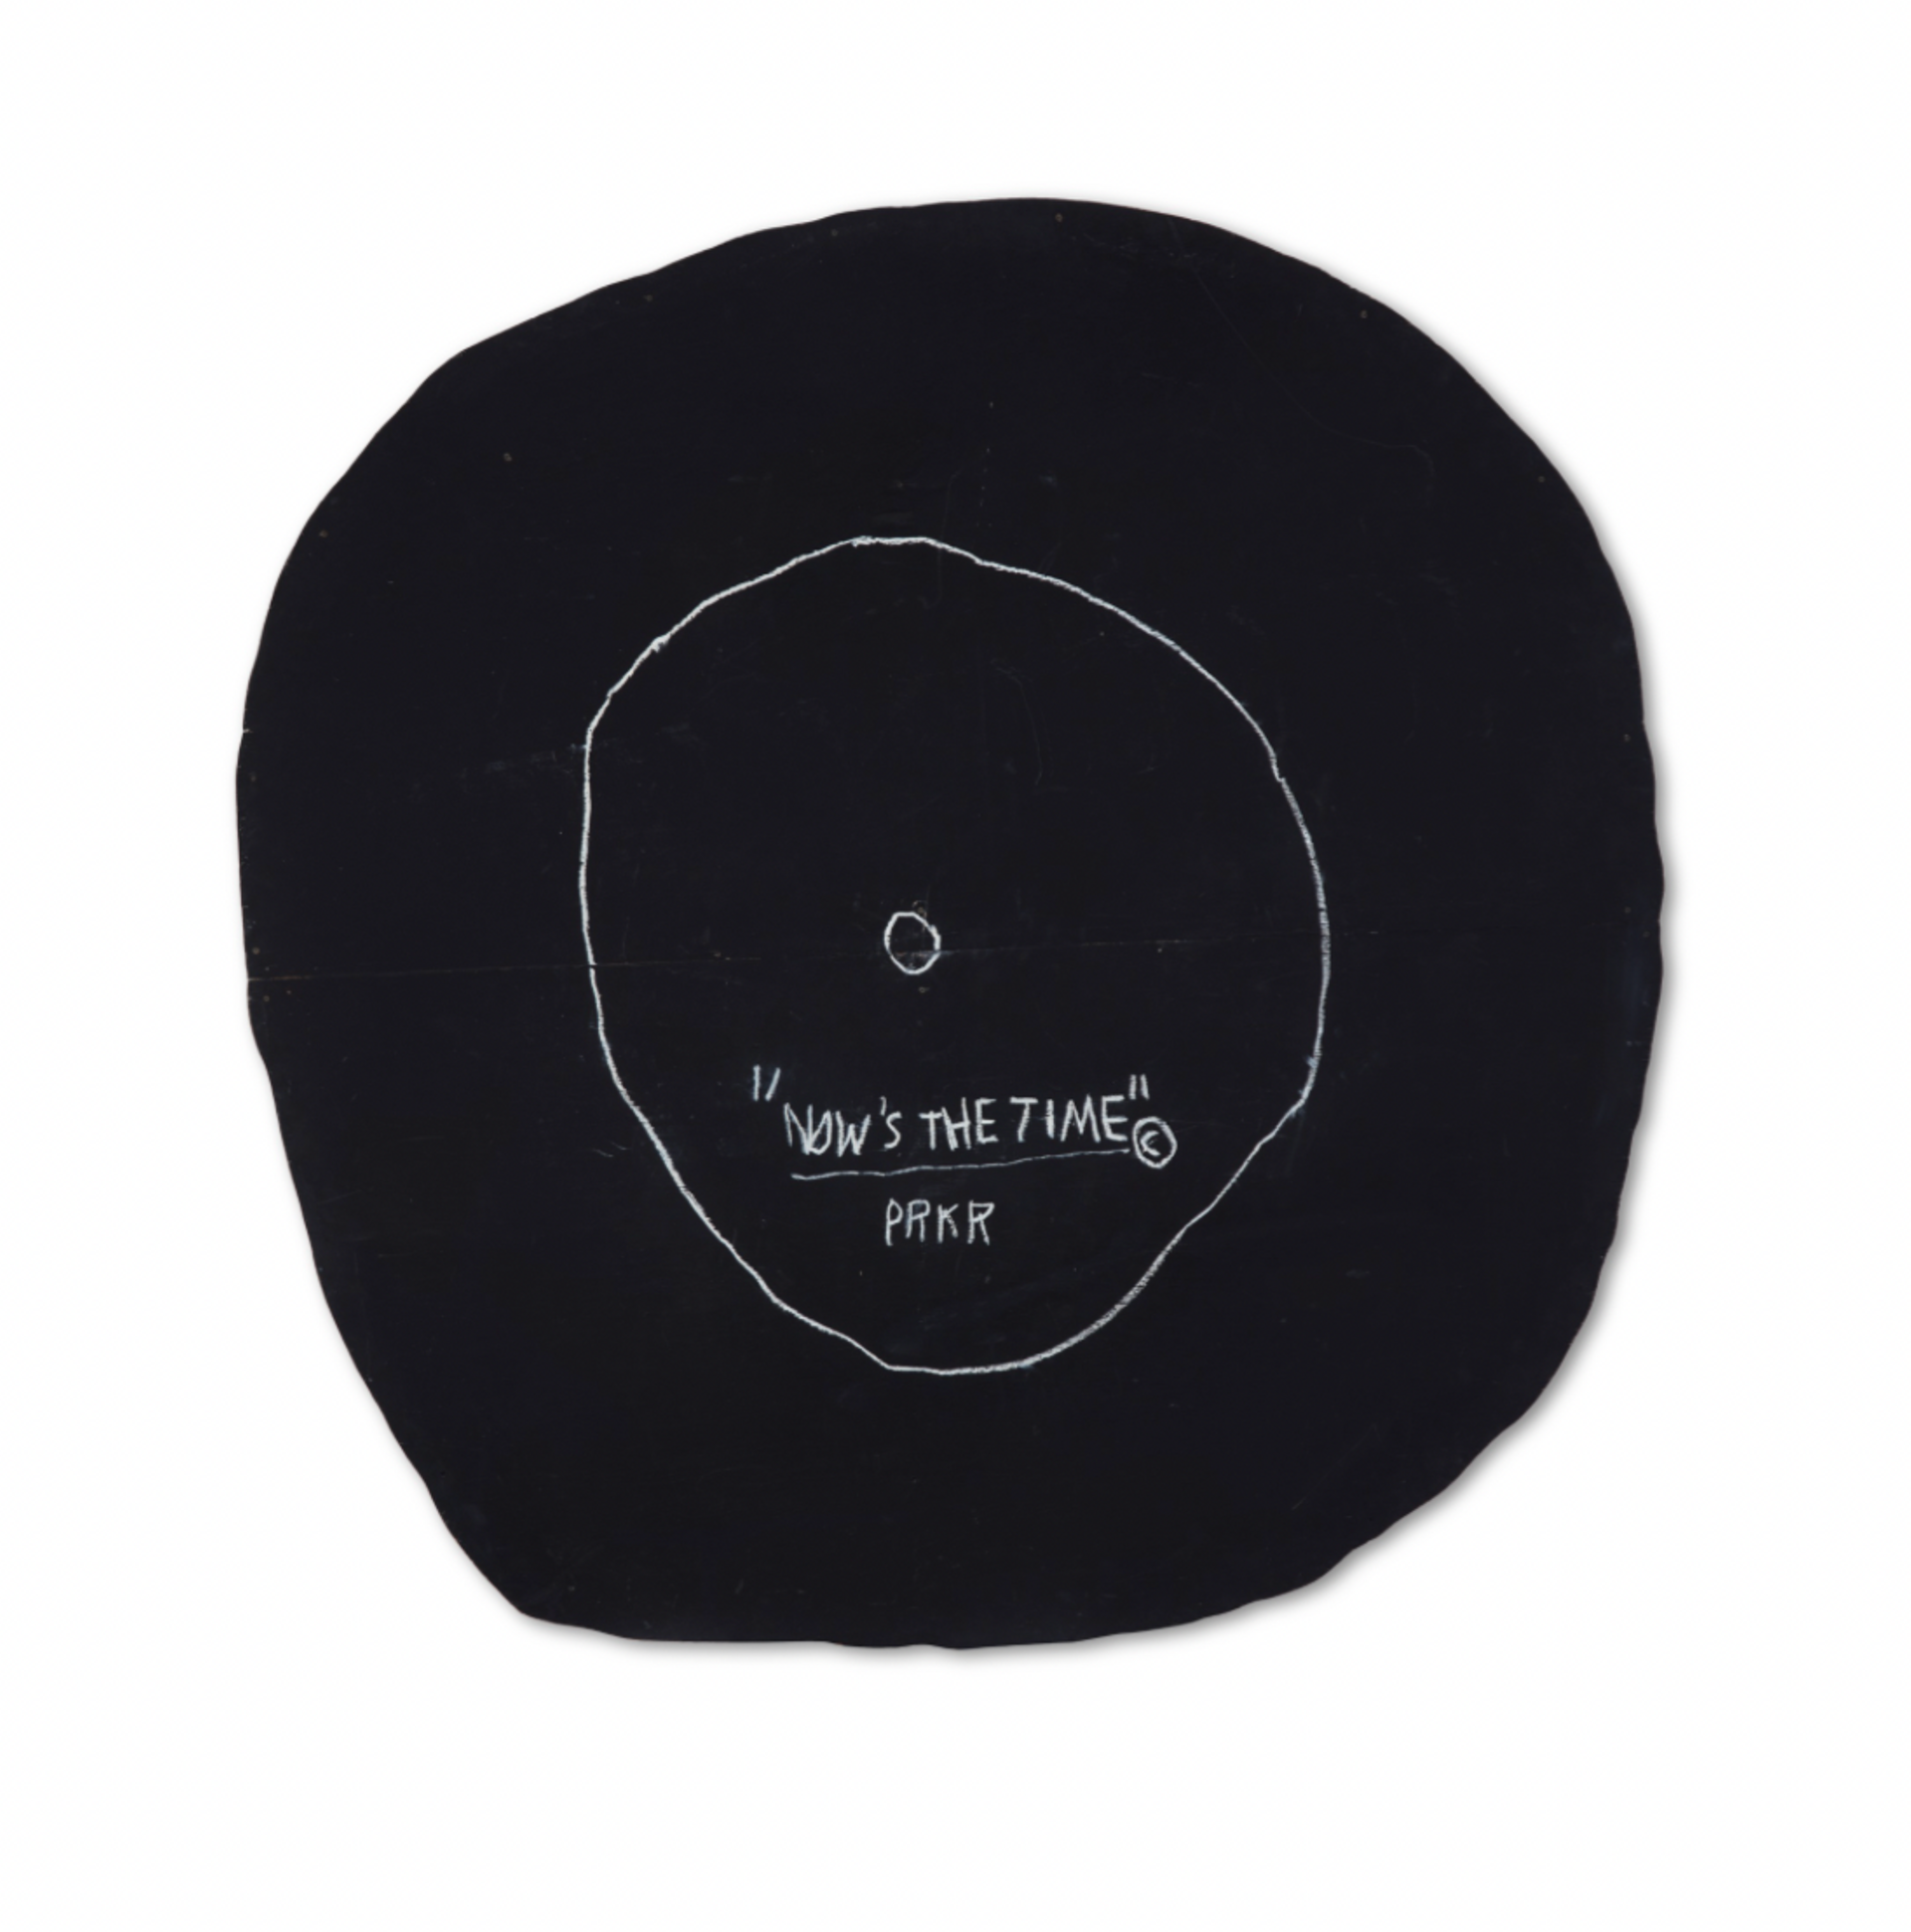 Circular wooden recreation by Jean-Michel Basquiat resembling a vinyl record, with a thin white line superimposed representing the circular record label displaying the handwritten-text ”NOW’S THE TIME © ’’ with ”PARK’’ scribbled directly underneath. 